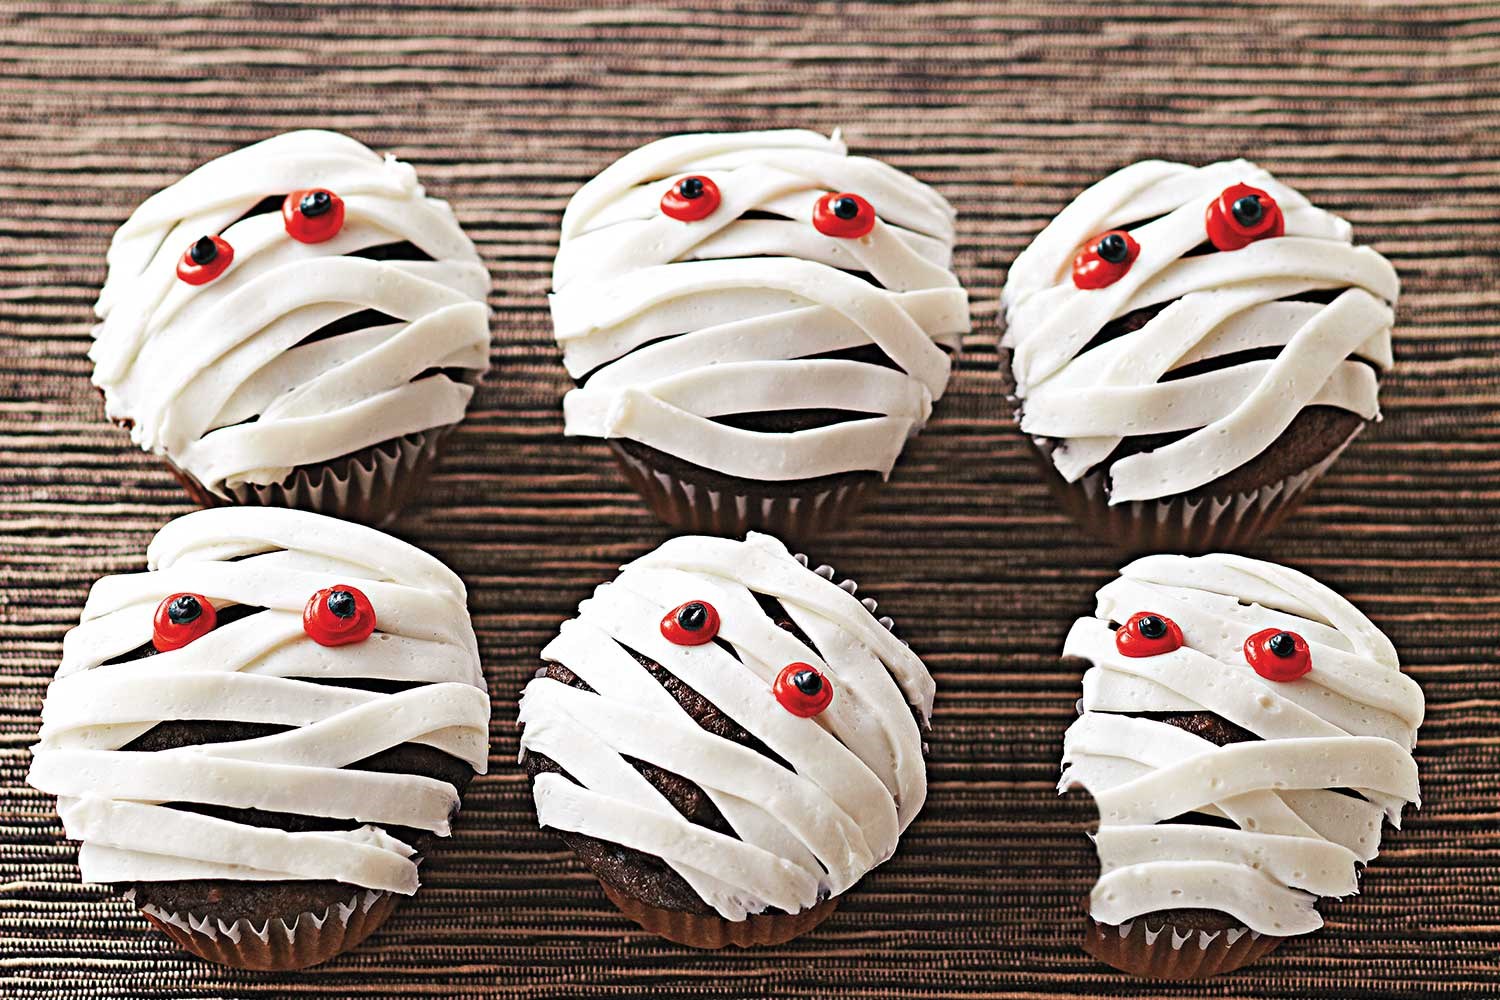 7 spooky Halloween cupcake ideas | Better Homes and Gardens